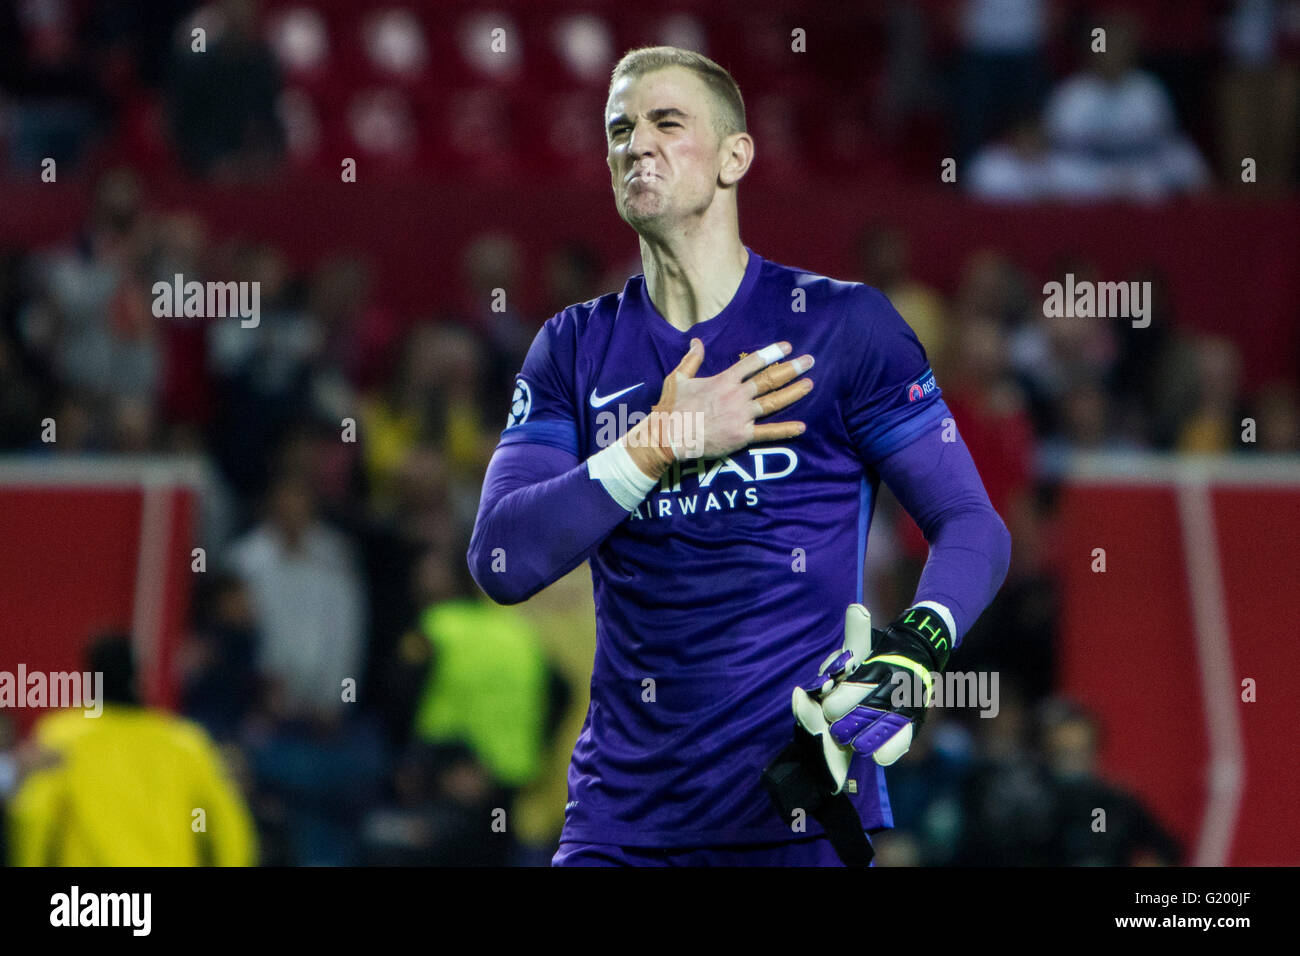 Joe Hart of Manchester City celebrates the victory after the UEFA Champions League Group D soccer match between Sevilla FC and Manchester City at Estadio Ramon Sanchez Pizjuan in Sevilla, Spain, 3 November, 2015 Stock Photo